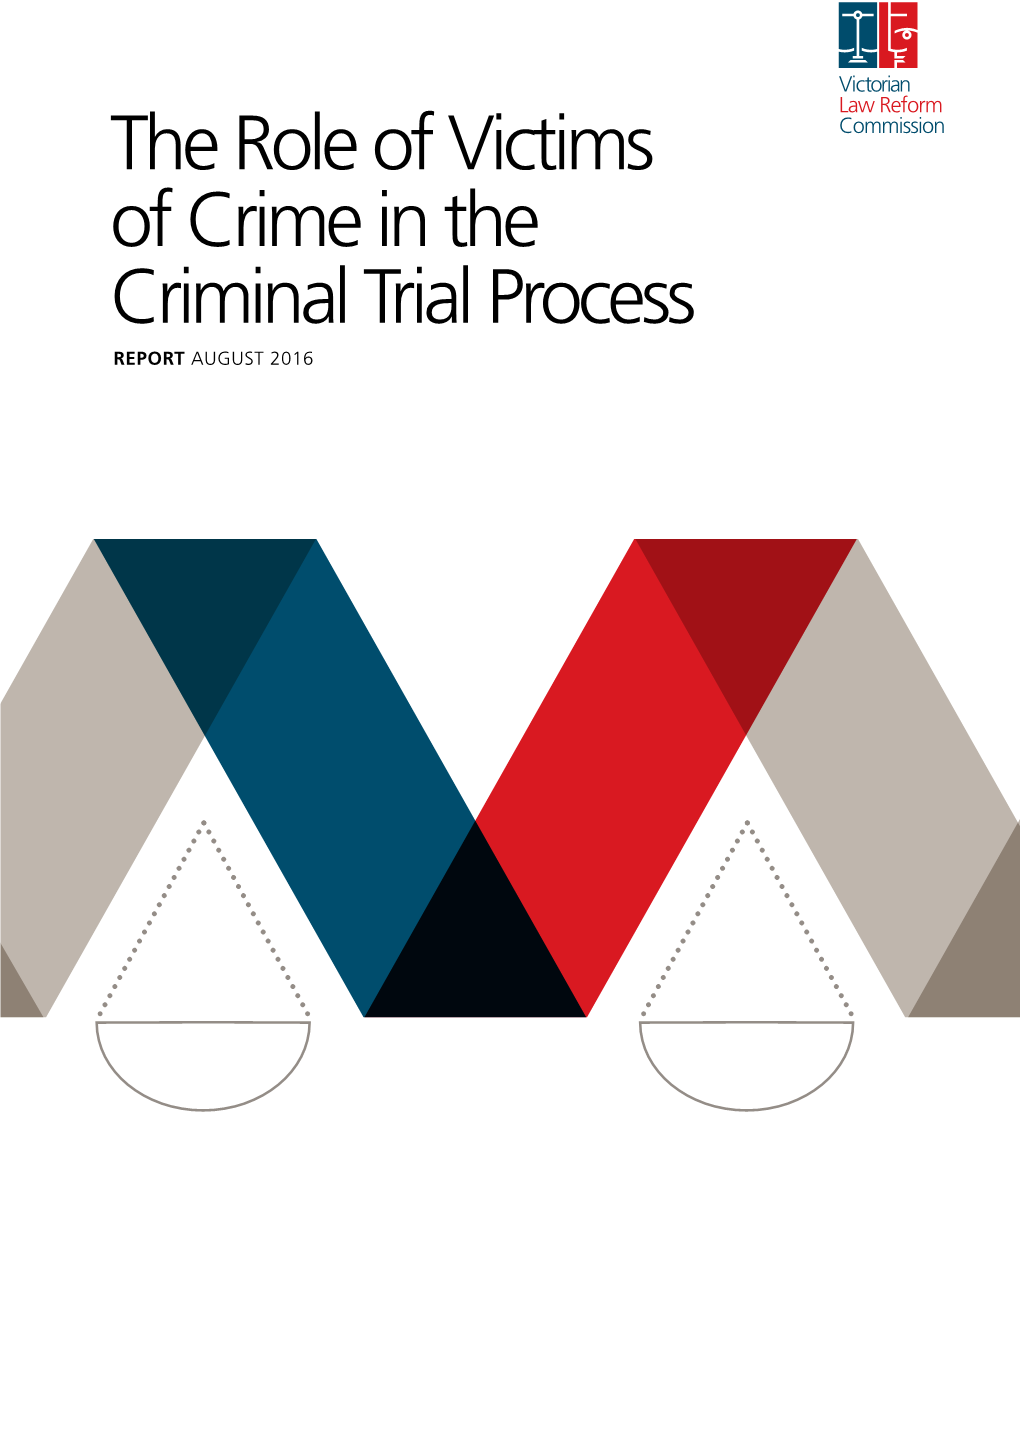 The Role of Victims of Crime in the Criminal Trial Process REPORT AUGUST 2016 Published by the Victorian Law Reform Commission Chair the Hon